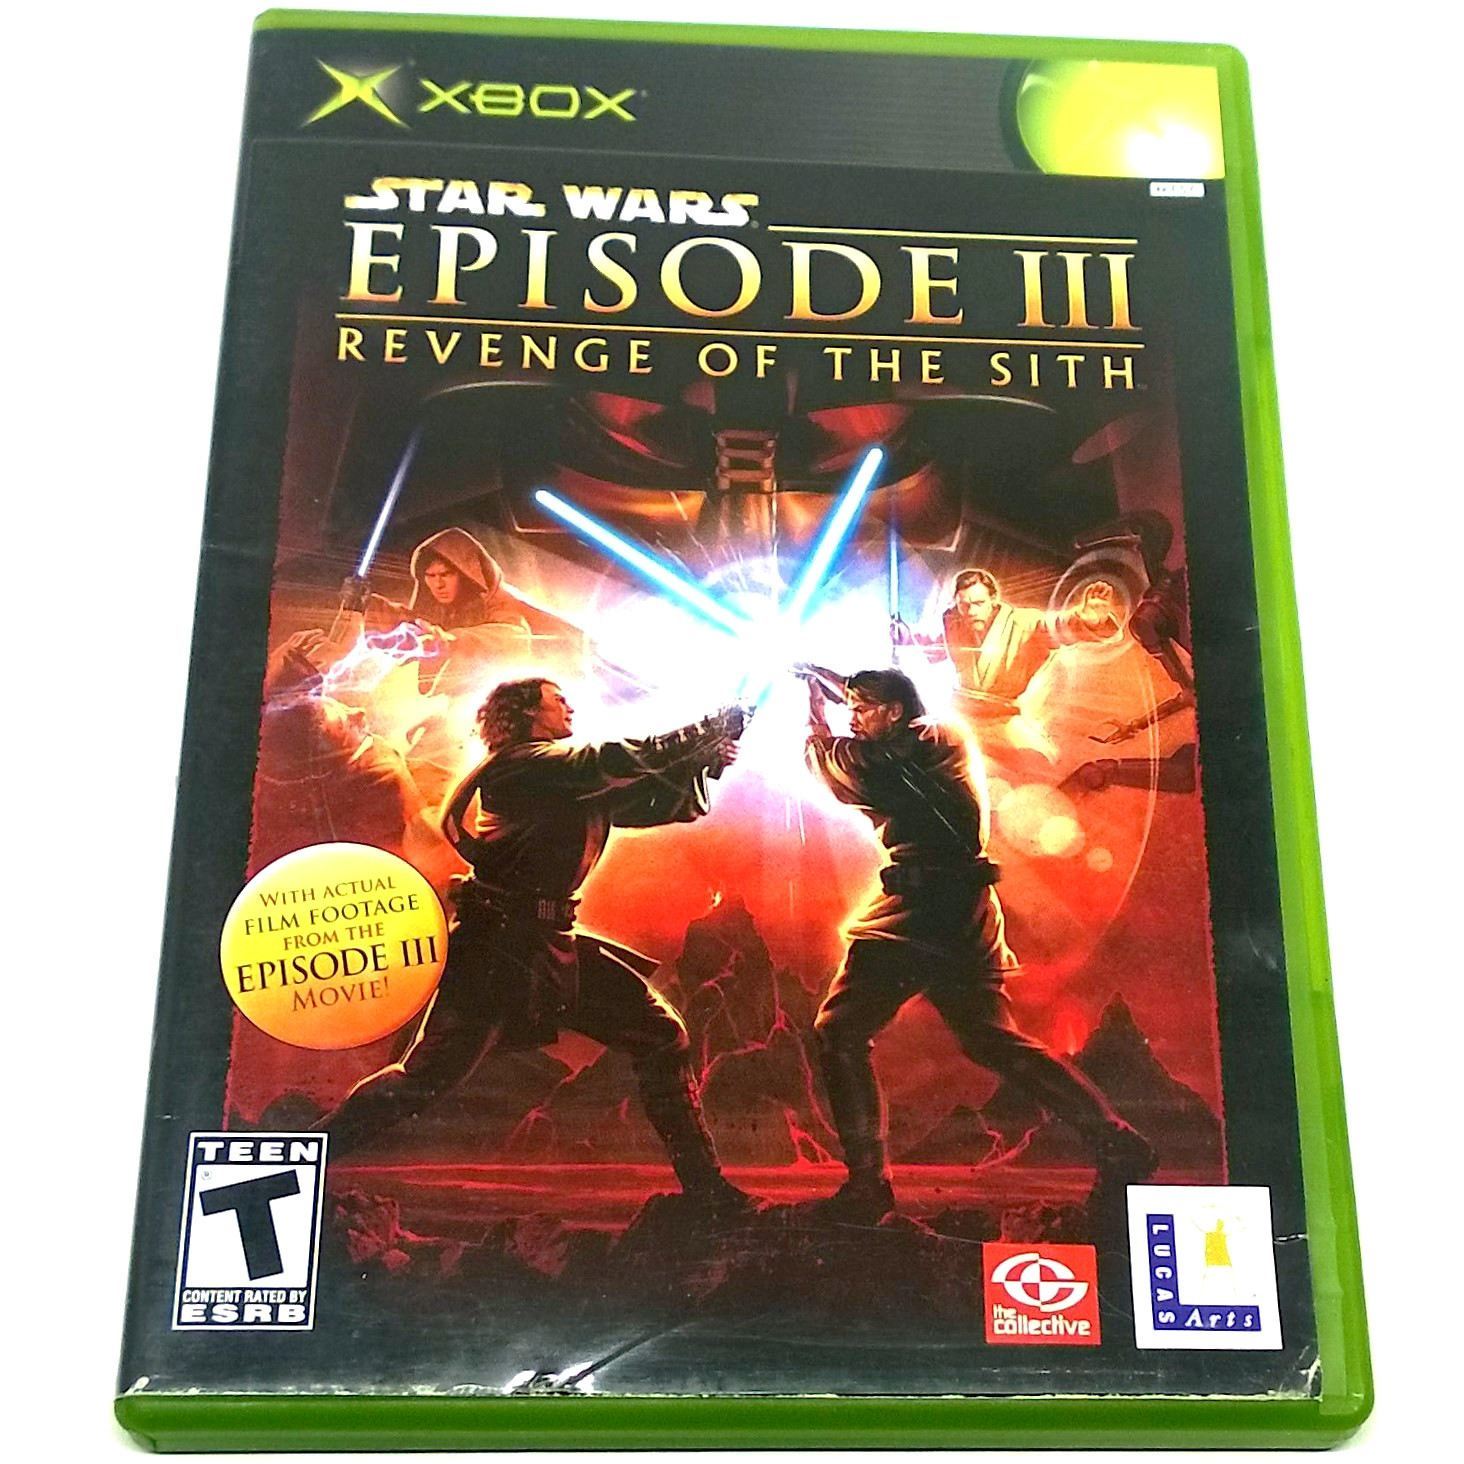 Star Wars Episode III: Revenge of the Sith for Xbox - Front of case